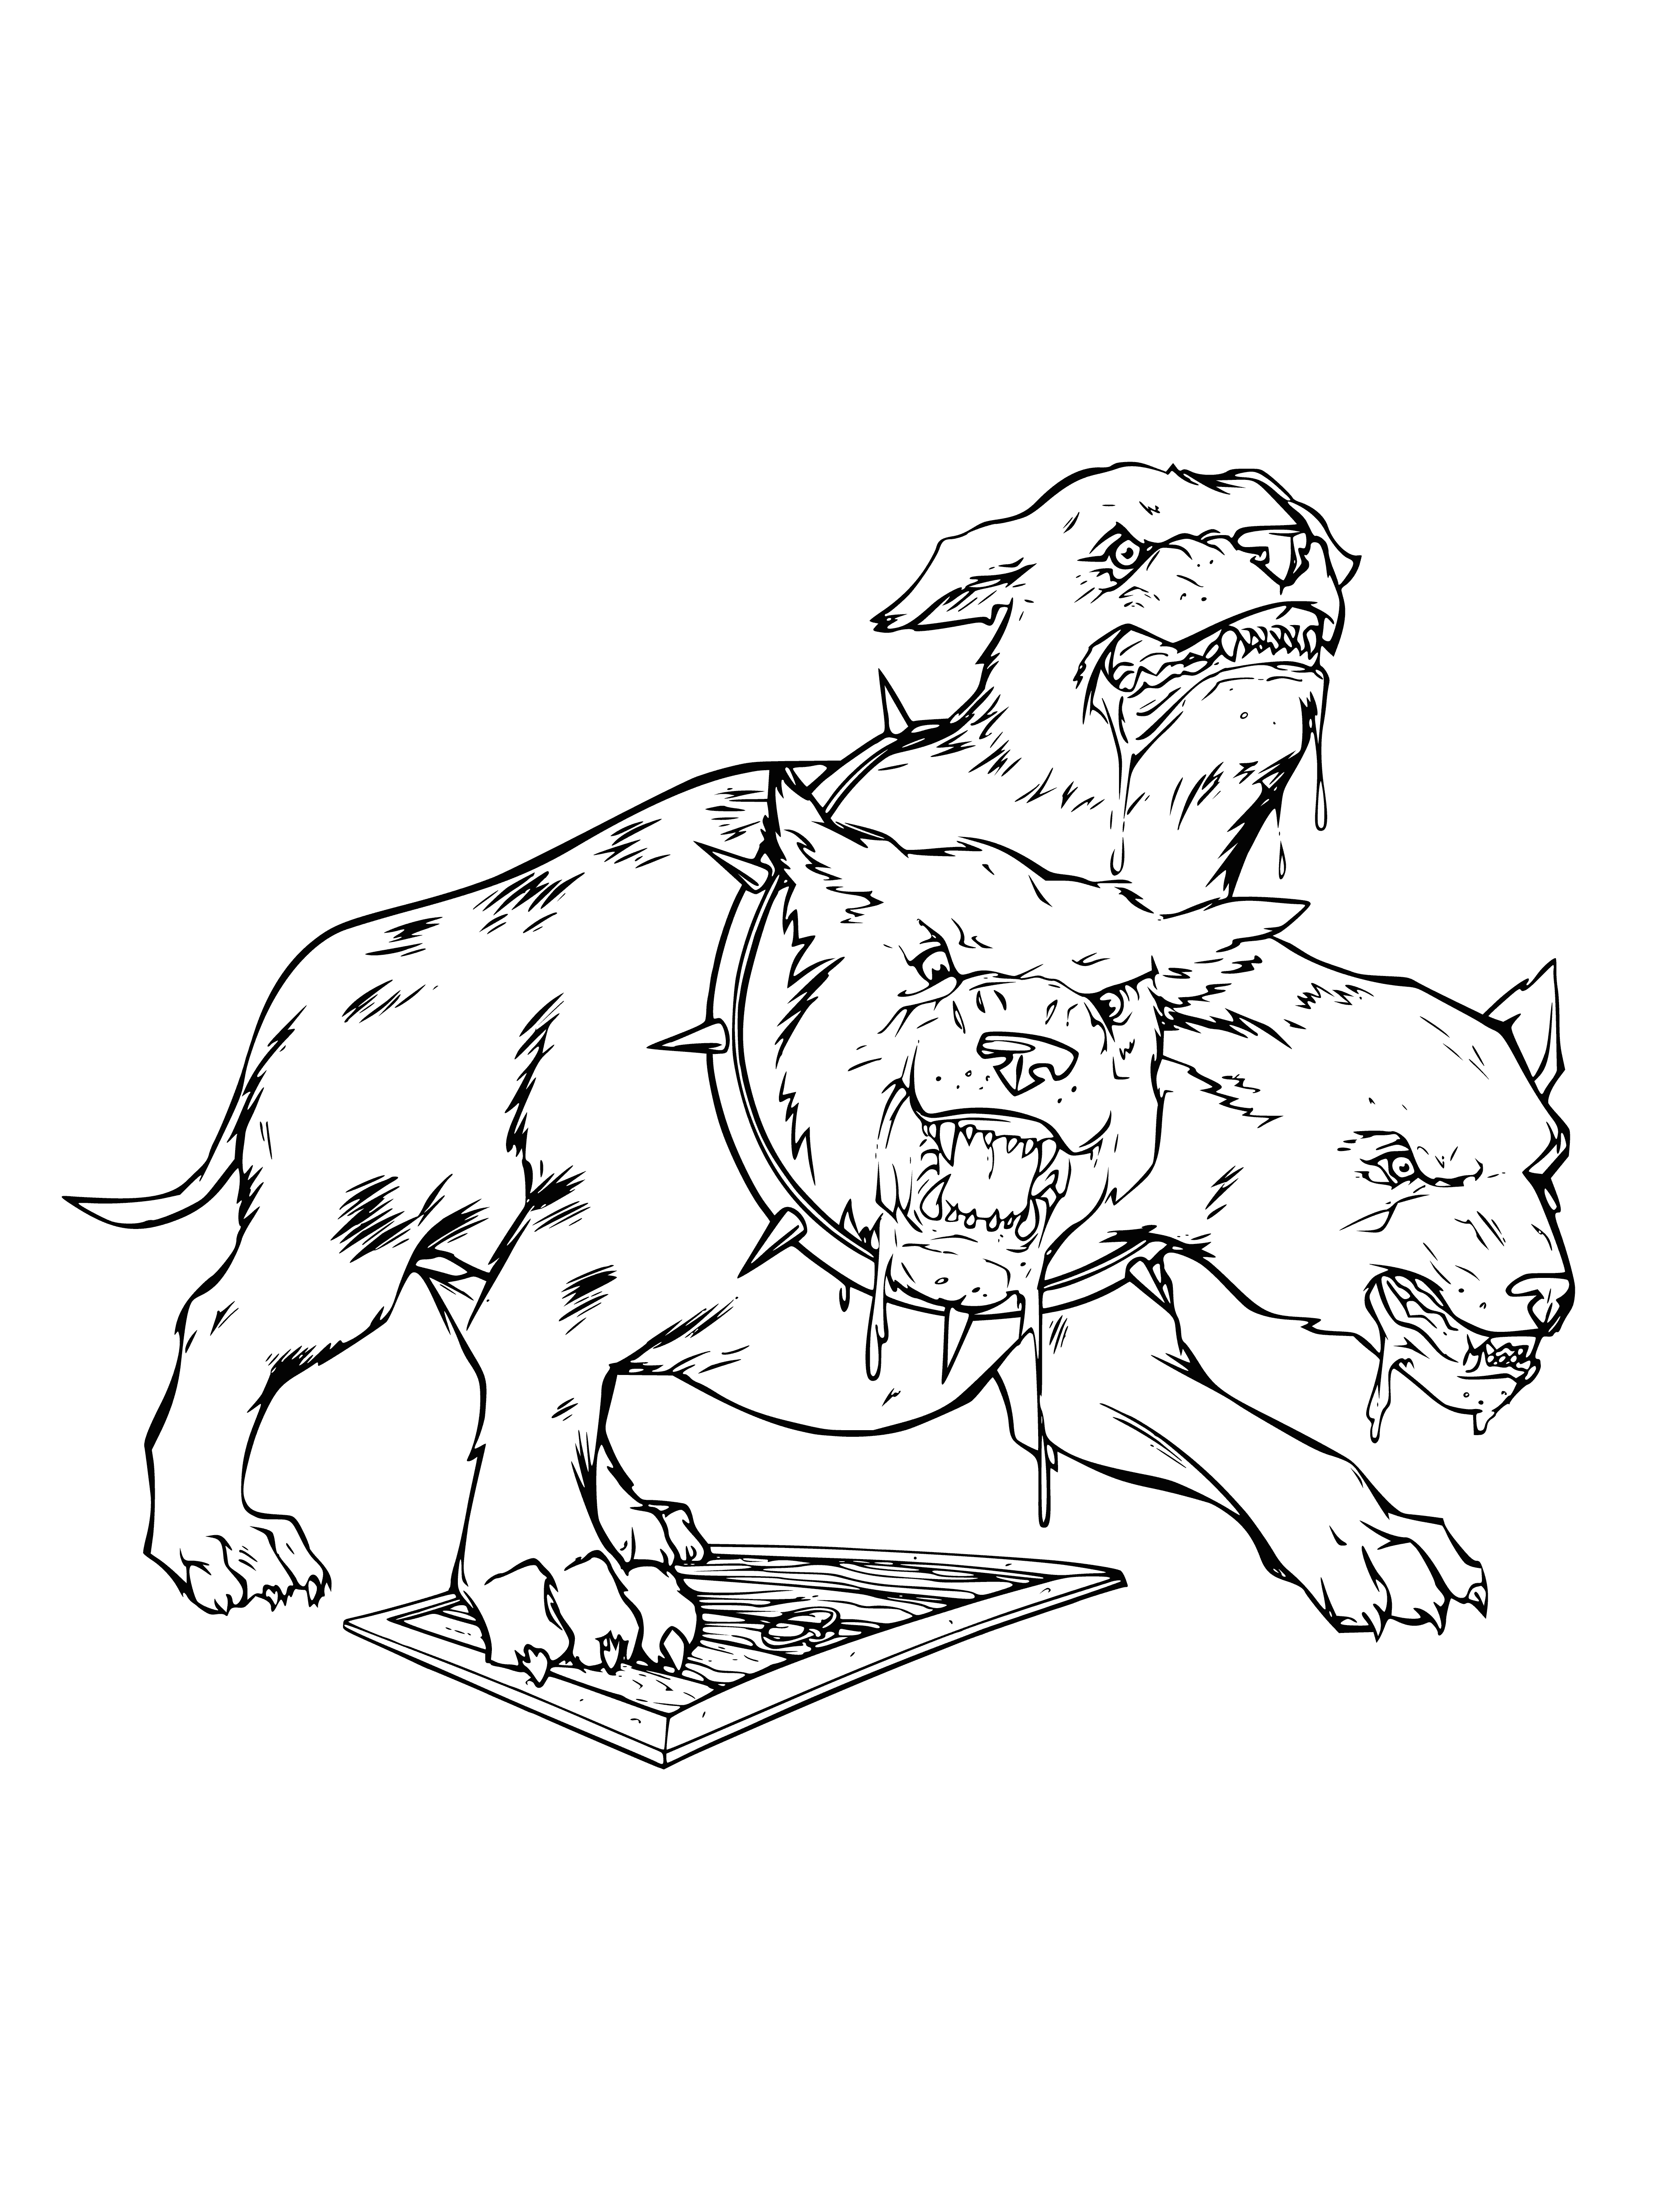 Tech-Headed Dog Snowball coloring page